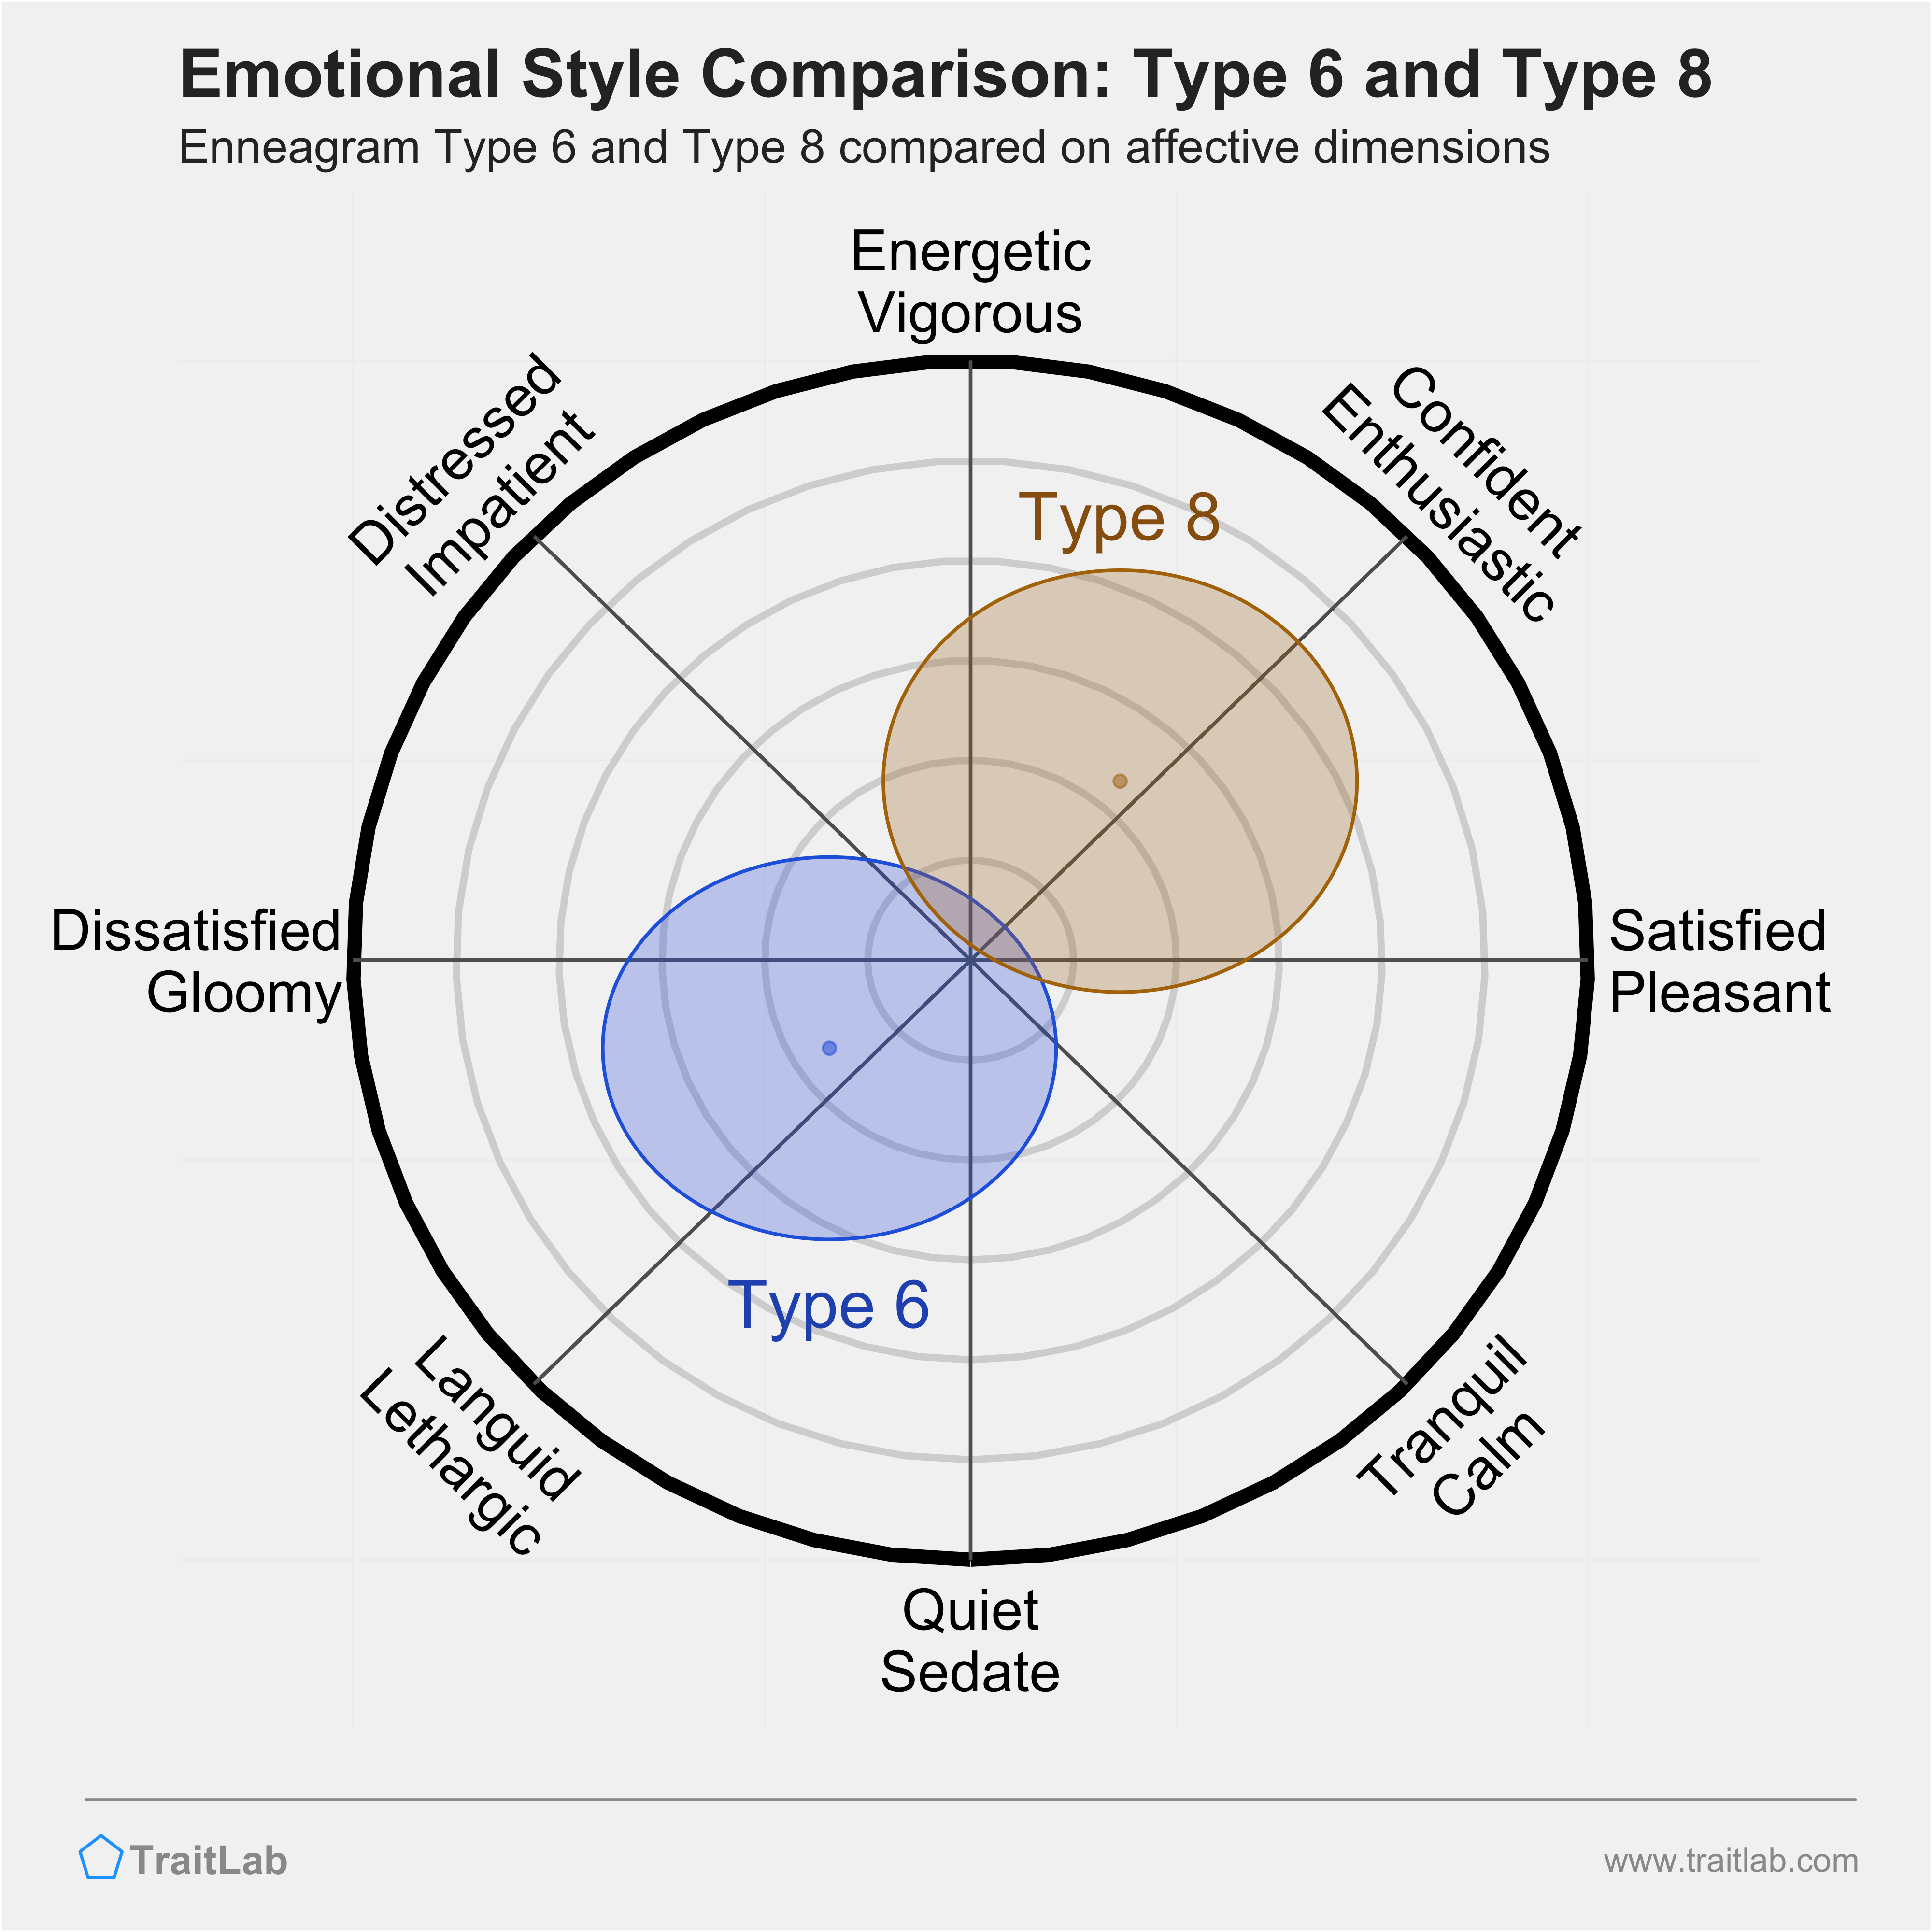 Type 6 and Type 8 comparison across emotional (affective) dimensions